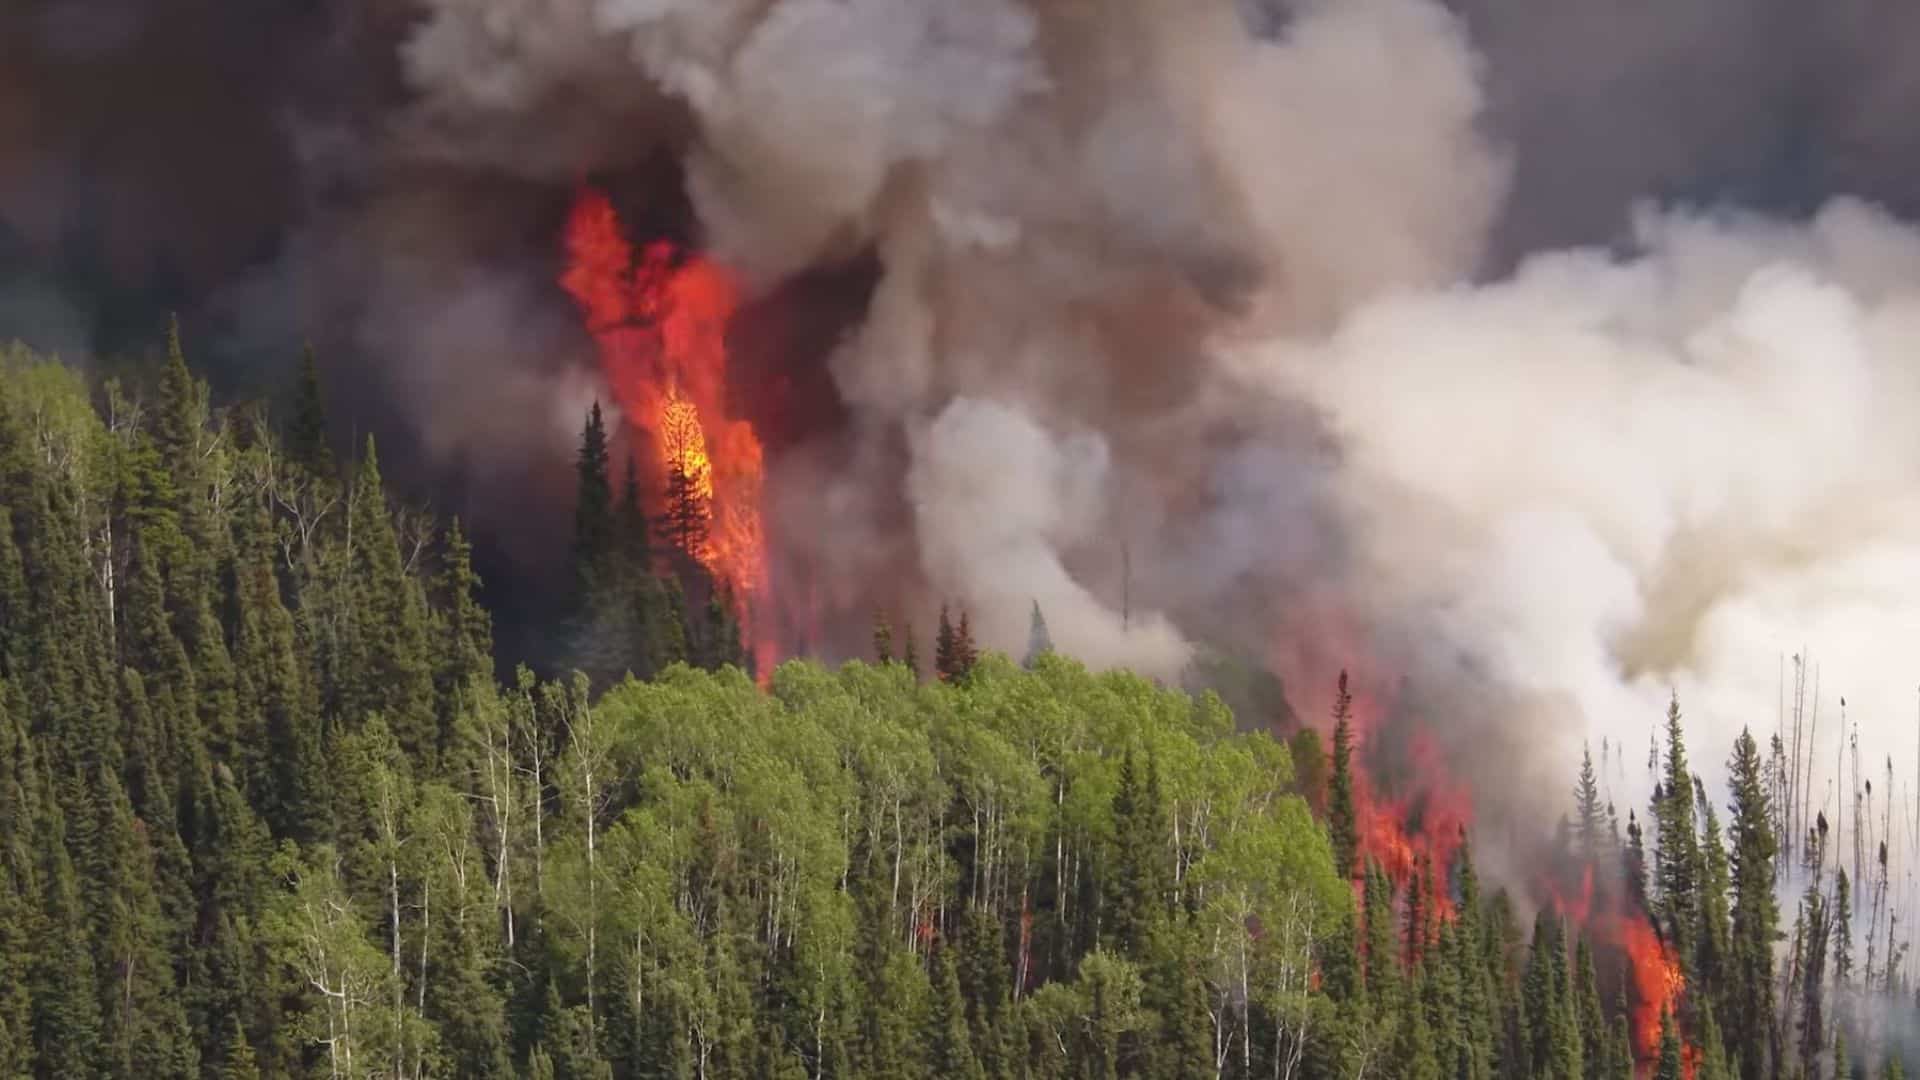 Latest update on the biggest wildfire in Canada